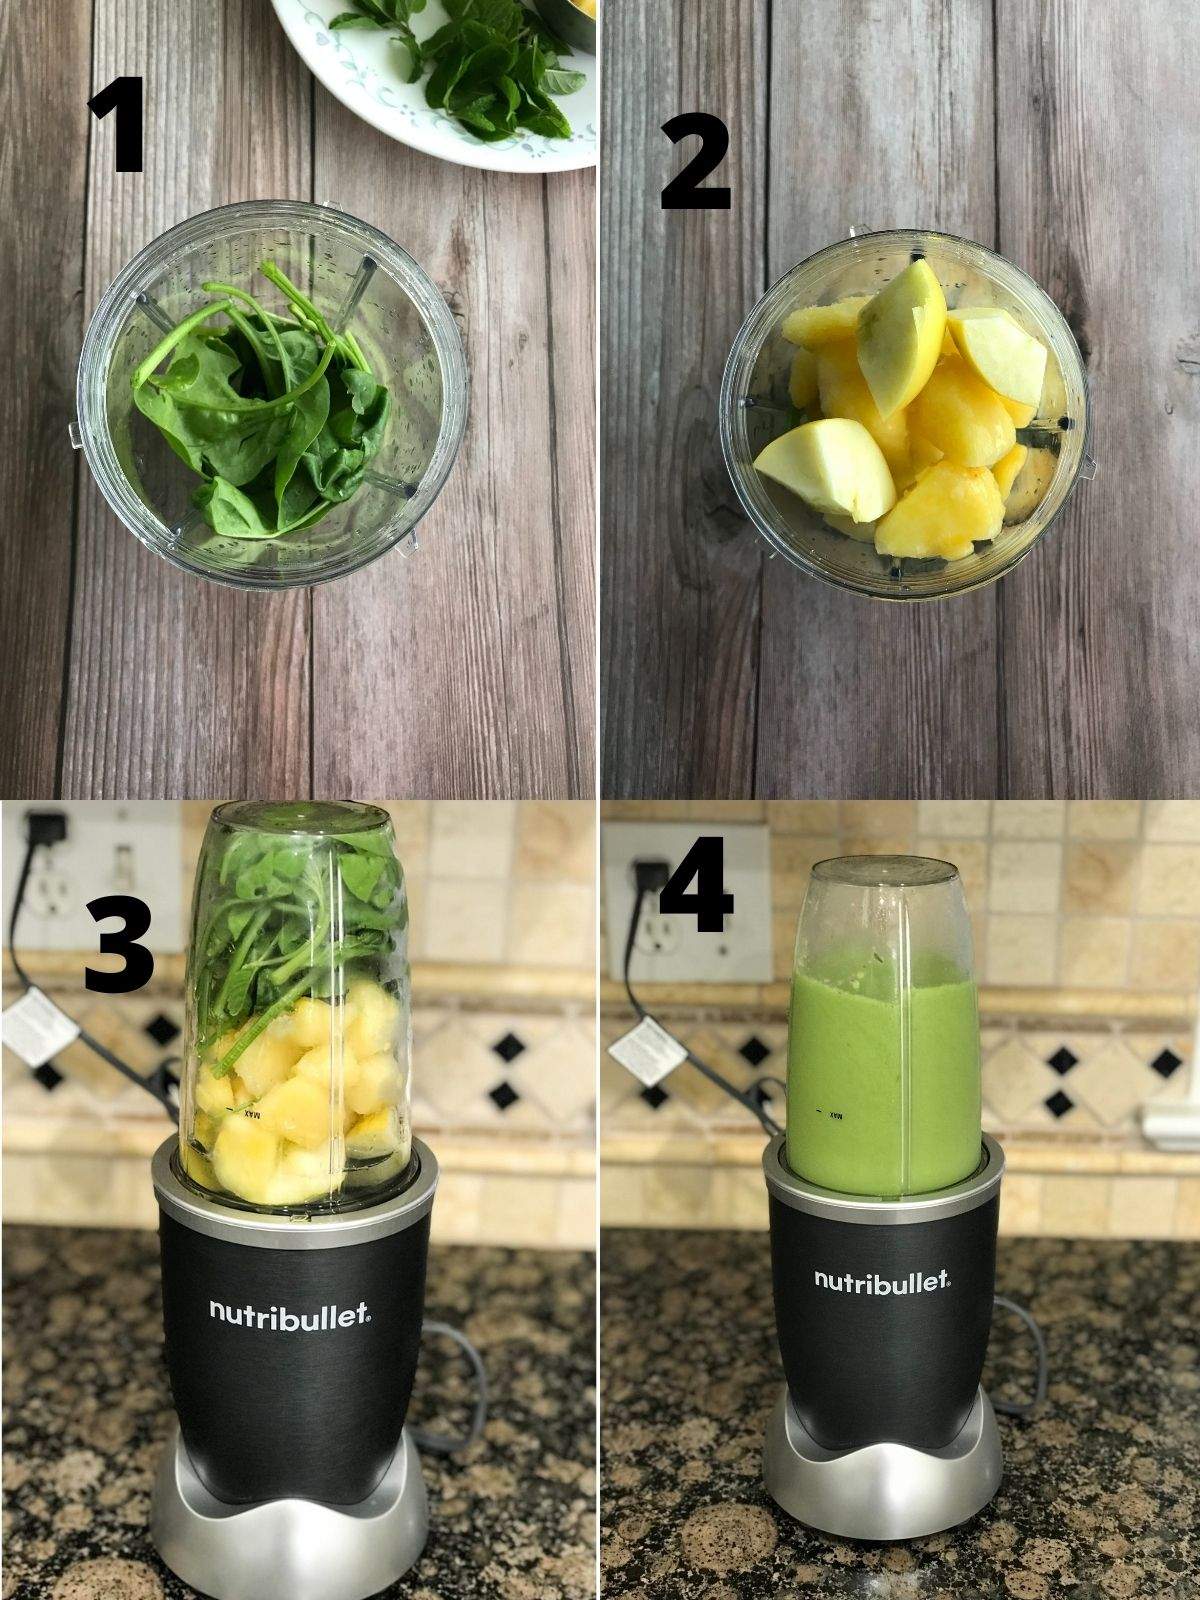 A blender is with spinach pineapple smoothie